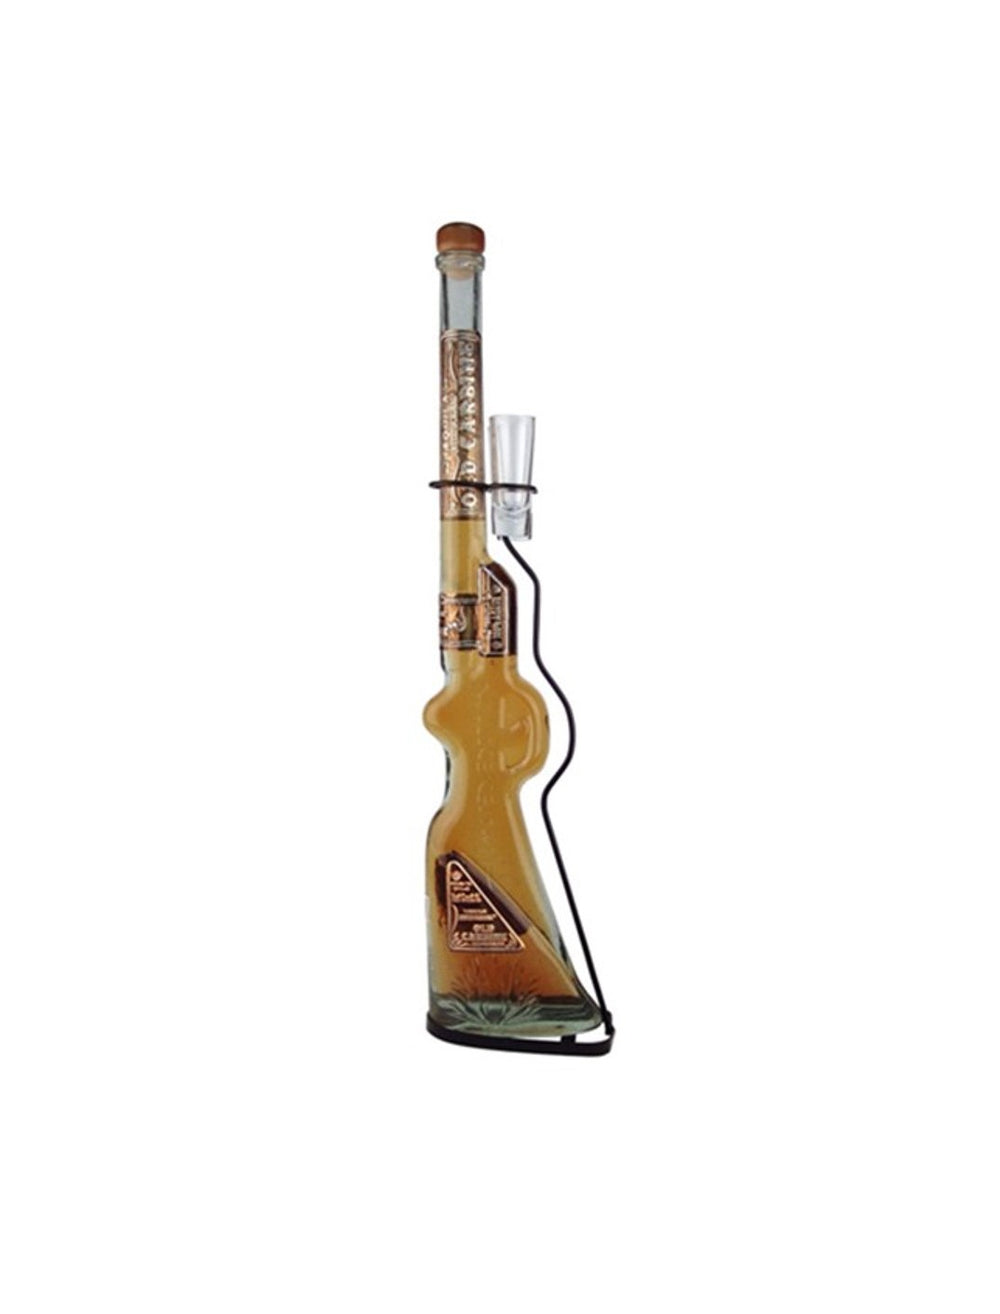 Old Carbine Rifle Gold Tequila -1 Liter